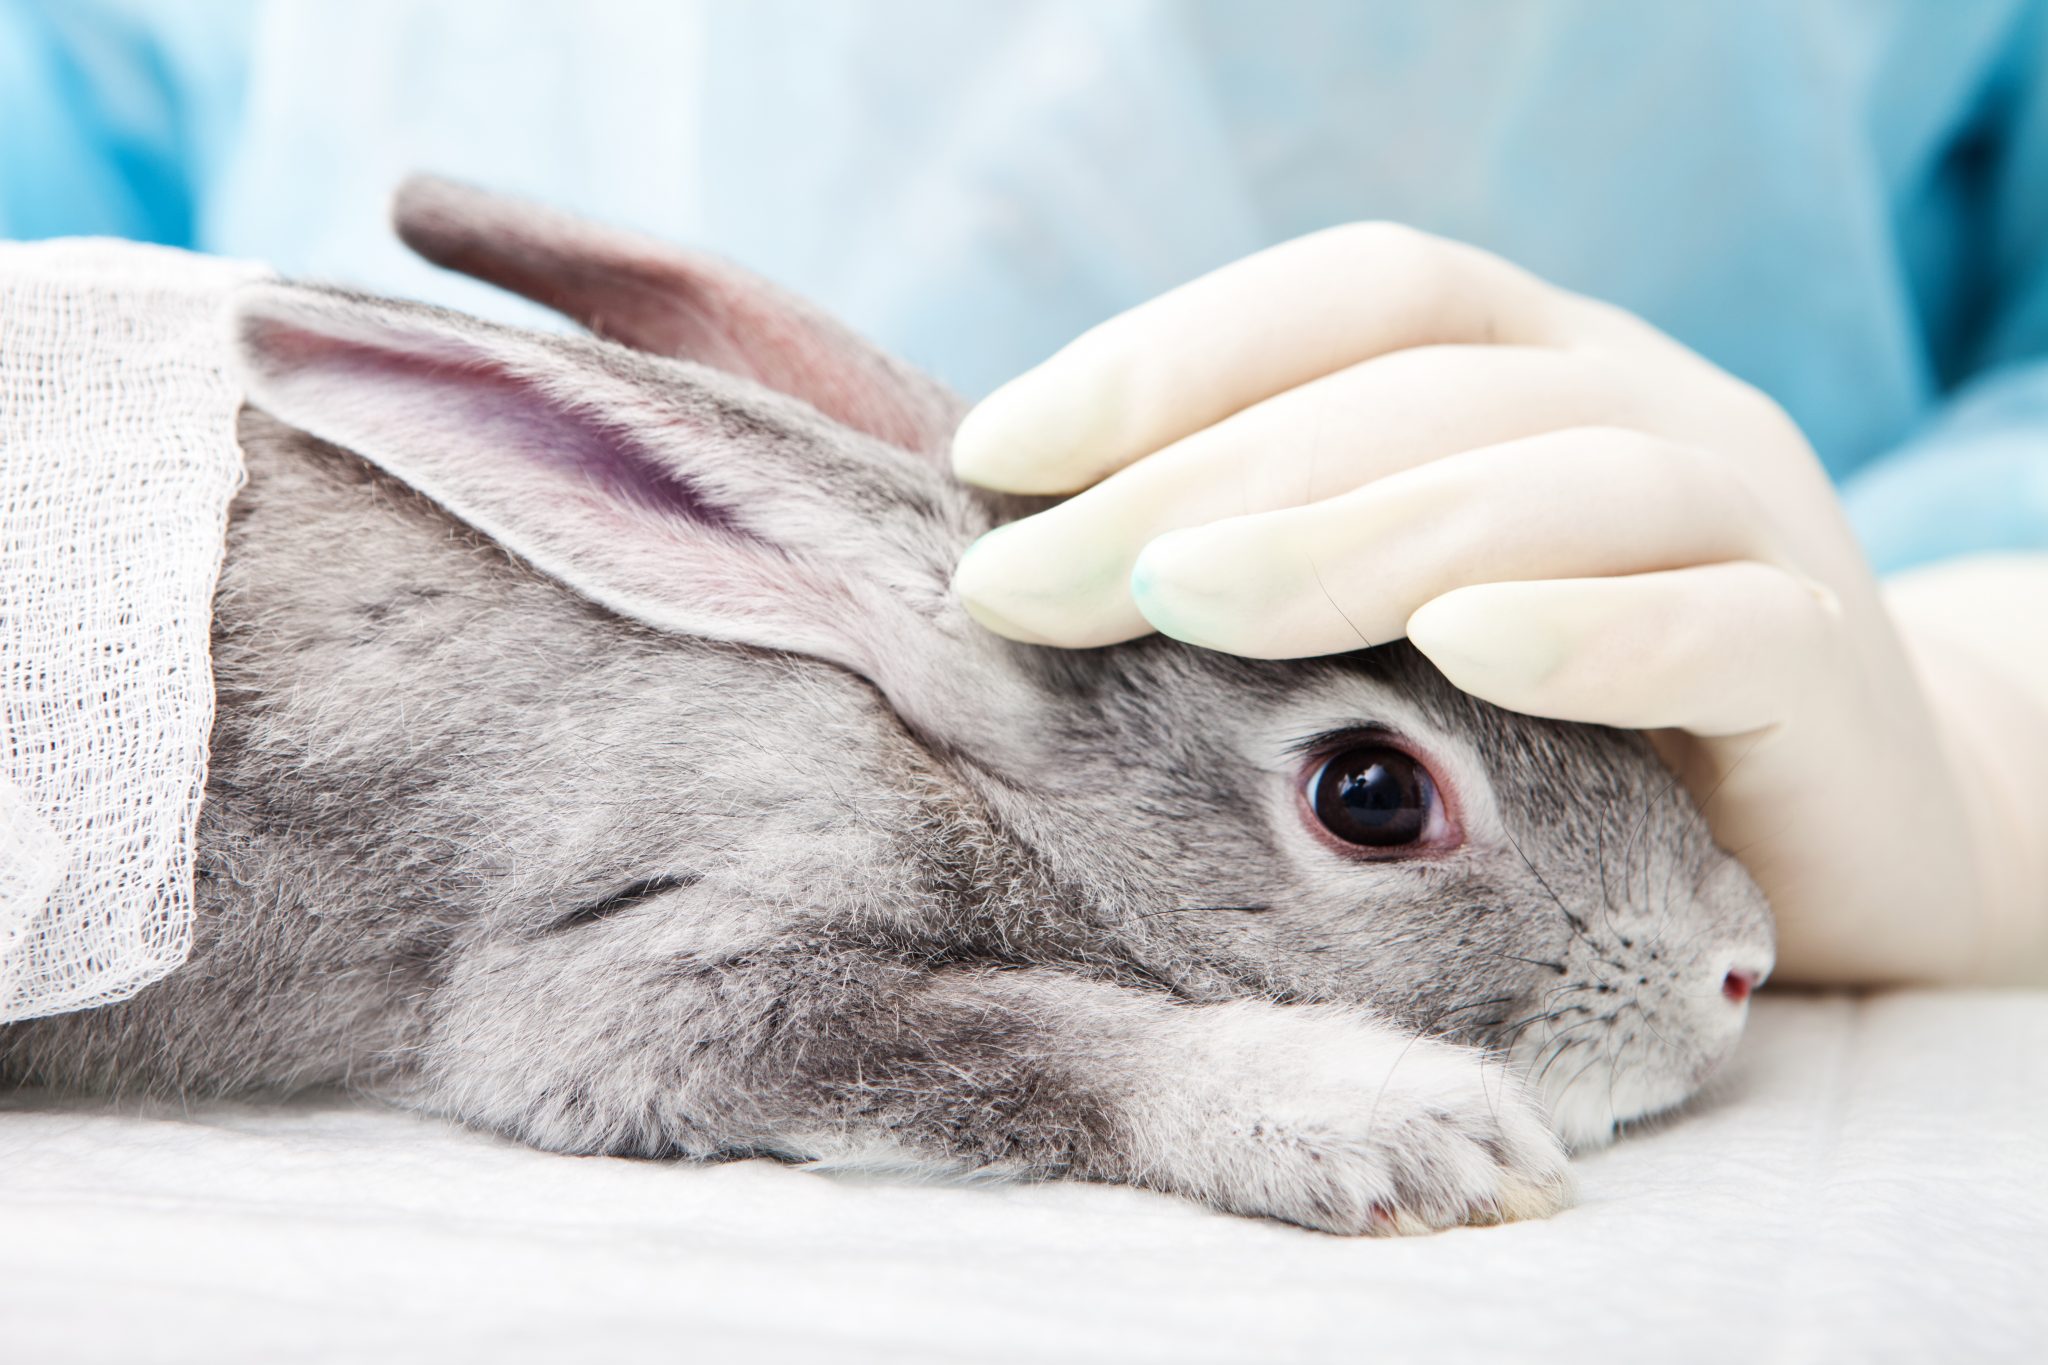 California Bans the Sale of Most Cosmetics Tested on Animals - Animal Legal  Defense Fund